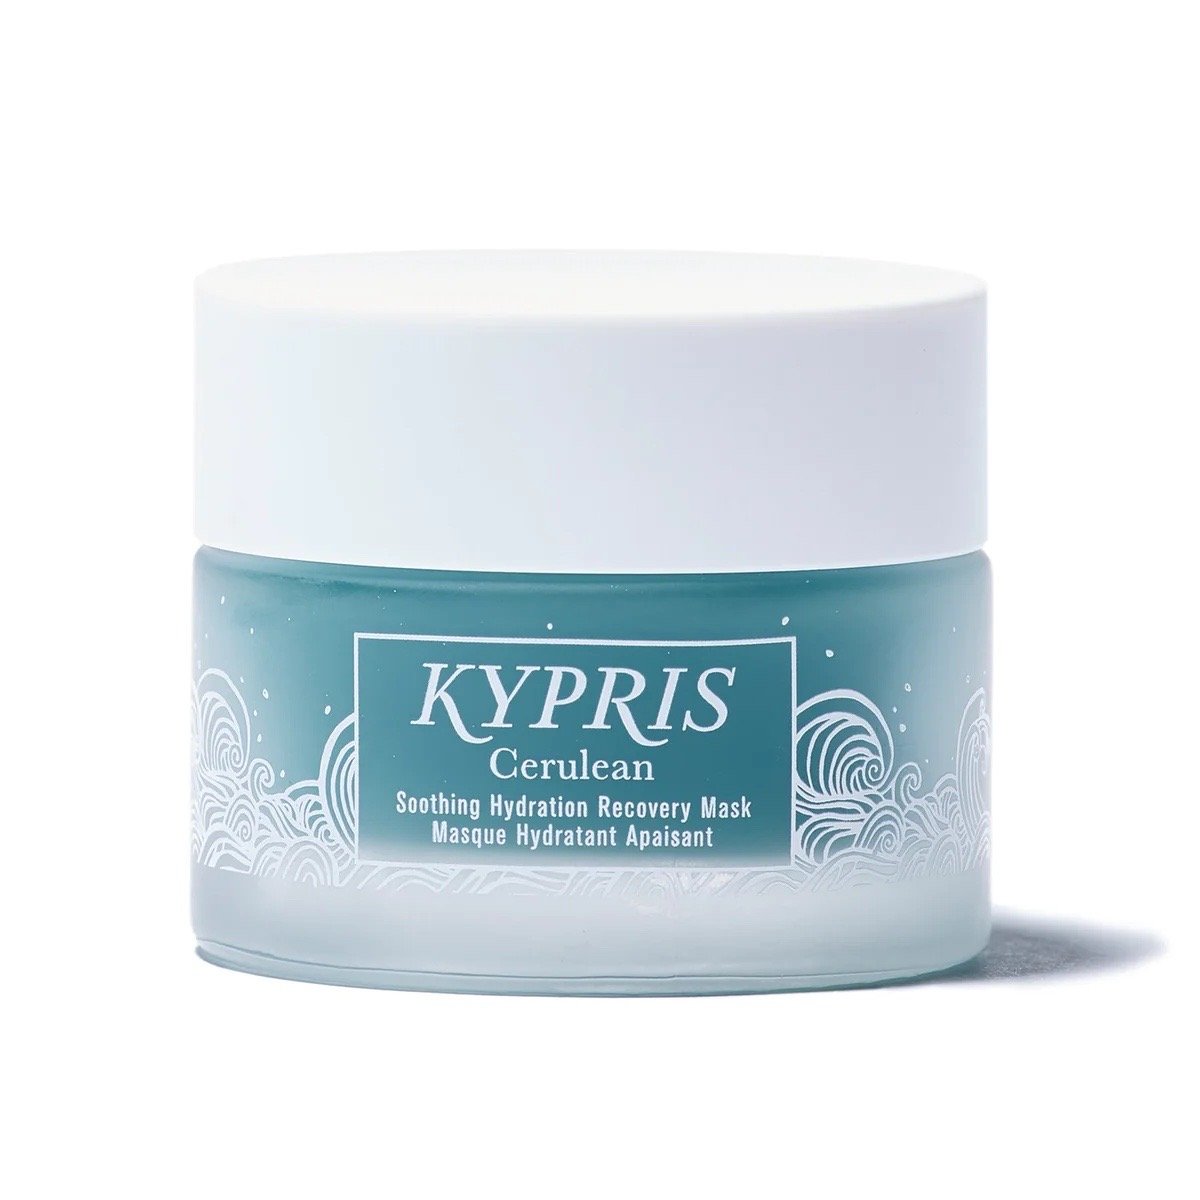 Kypris Intense Soothing Hydration Mask (Copy)